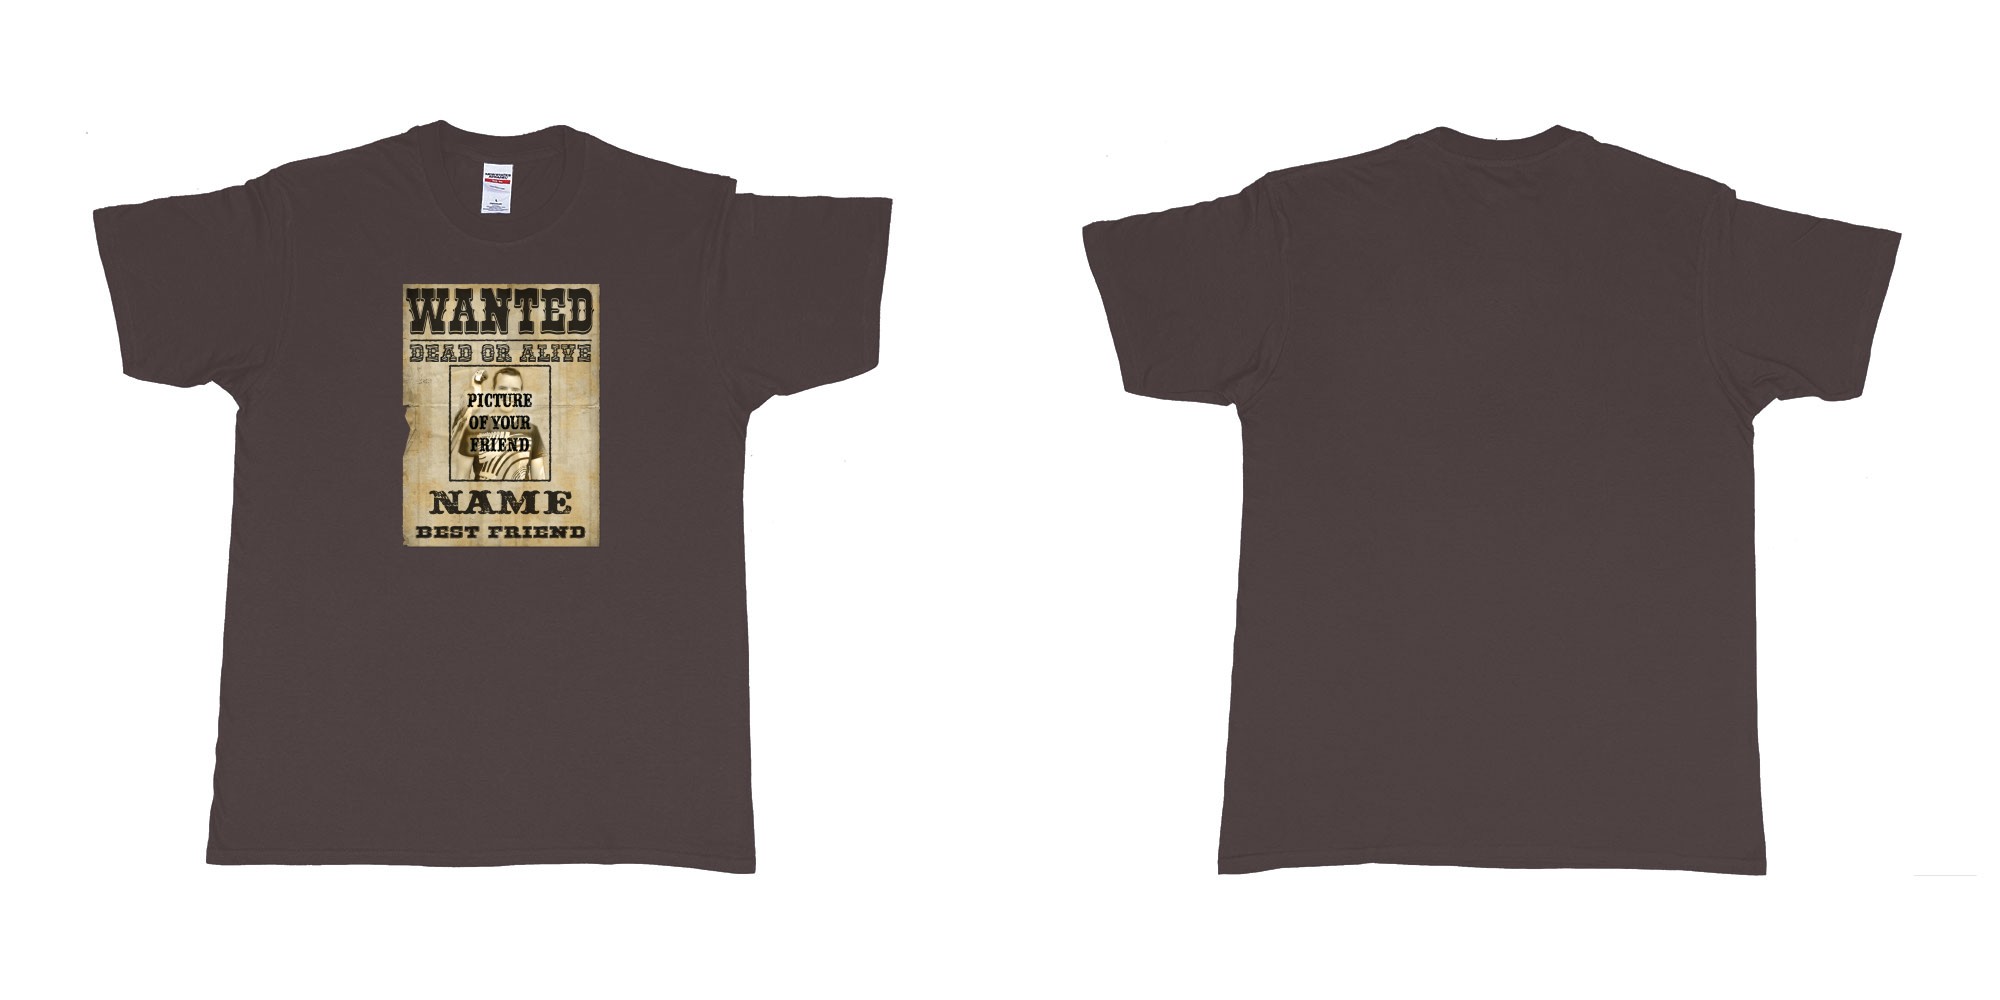 Custom tshirt design Wanted Poster in fabric color dark-chocolate choice your own text made in Bali by The Pirate Way